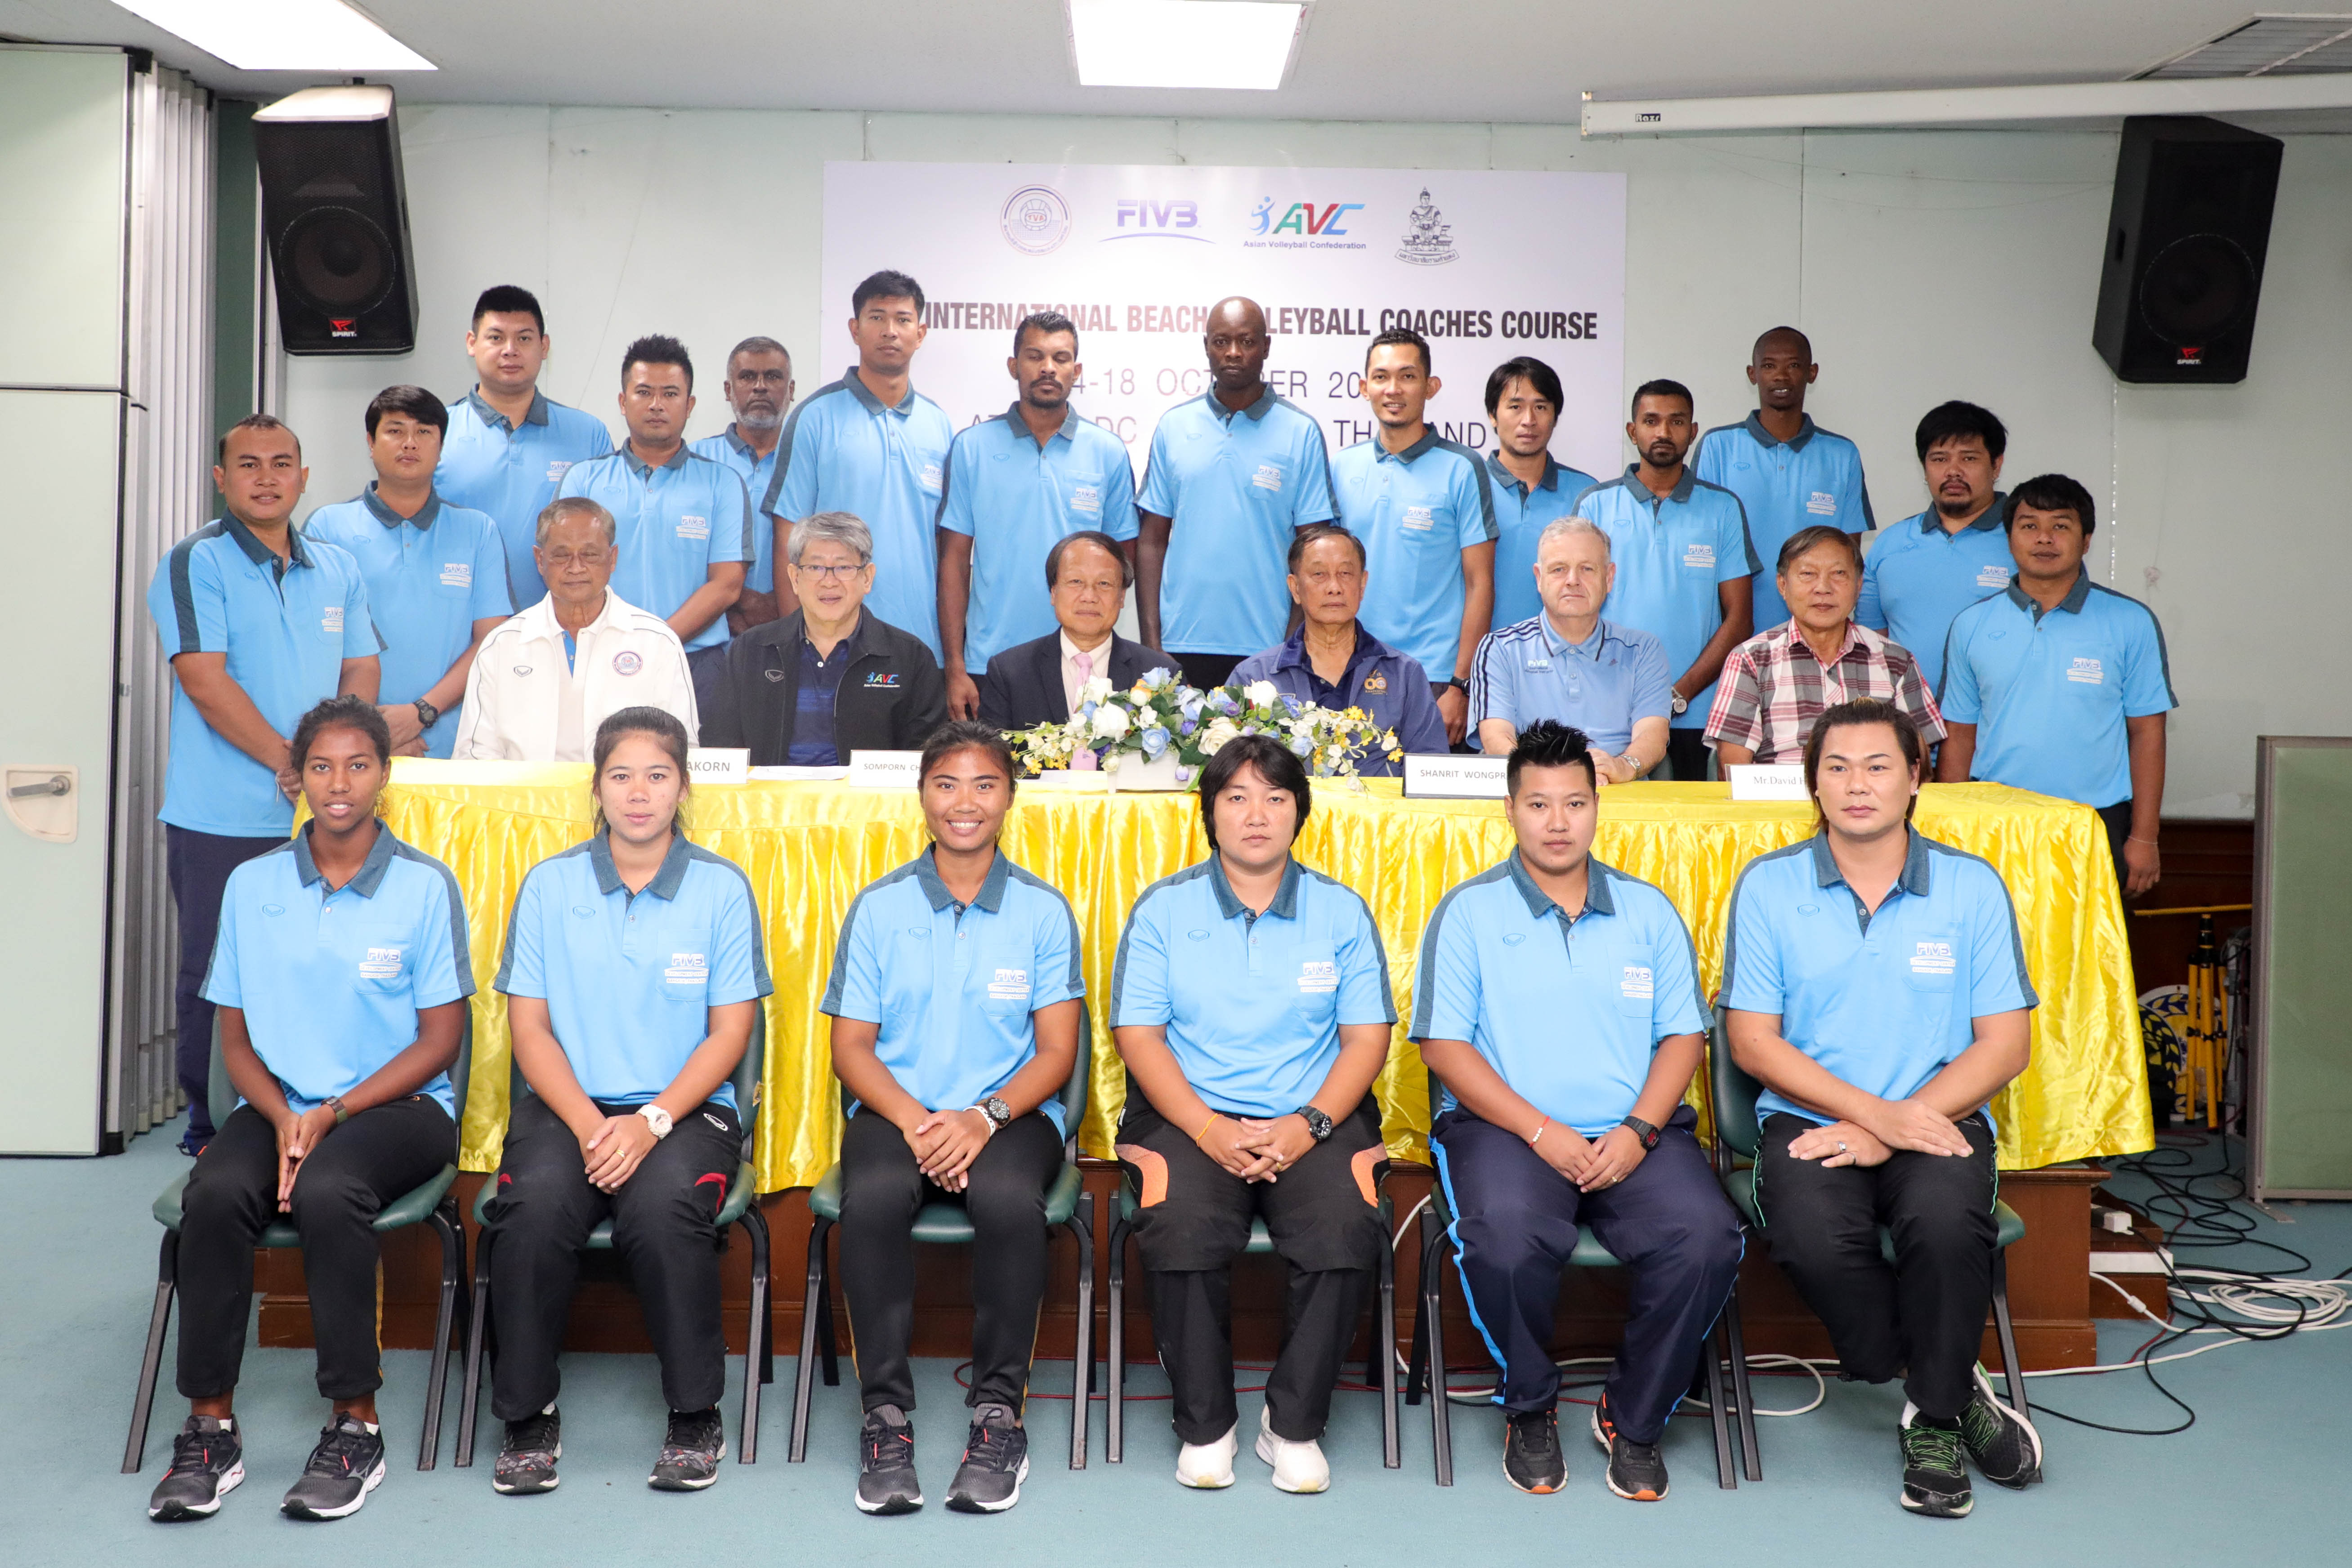 22 ATTEND FIVB BEACH VOLLEYBALL COACHES COURSE IN THAILAND FROM OCT 14-18